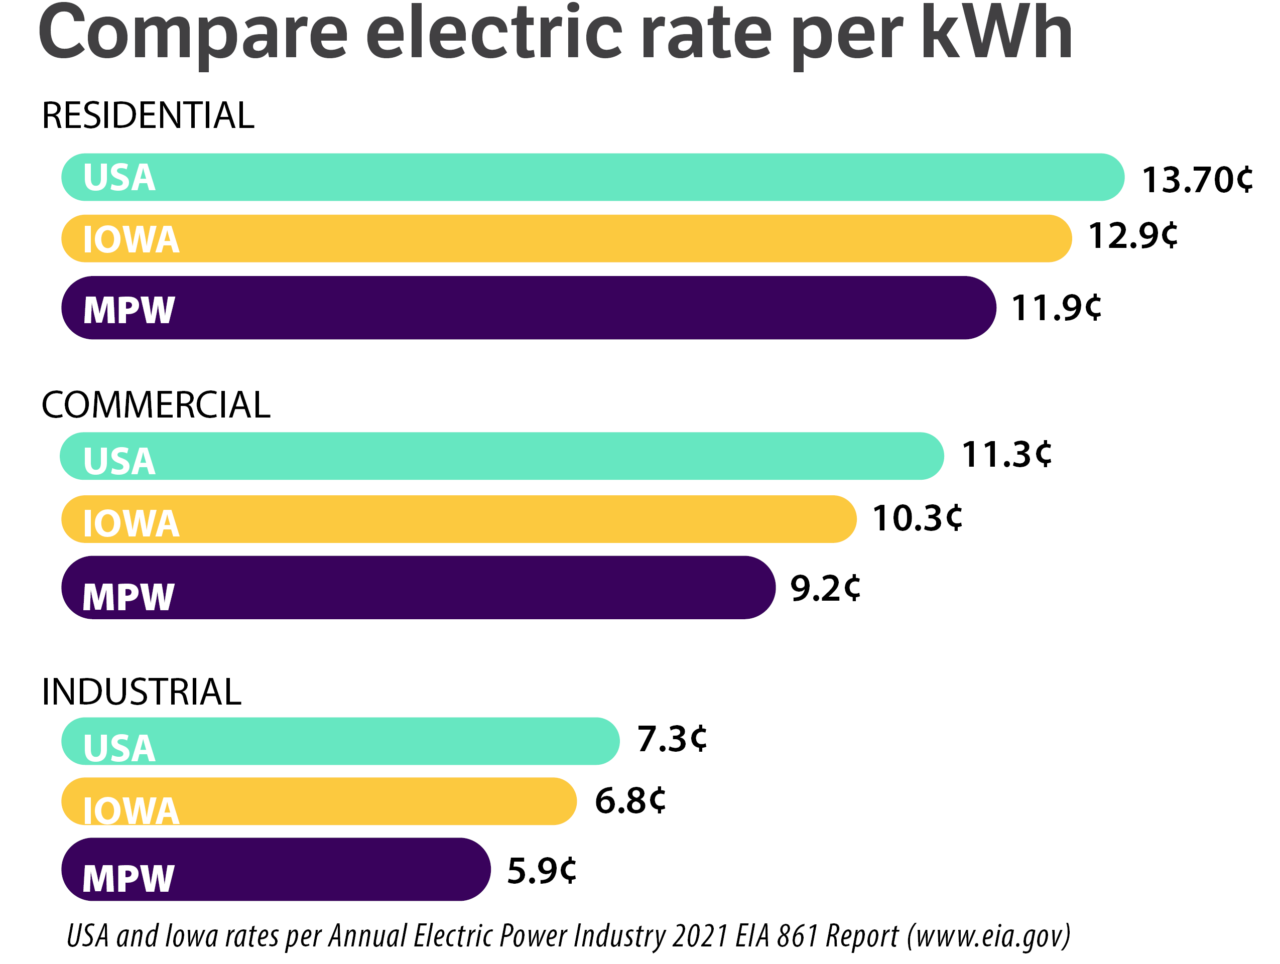 MPW Electric Rate Chart Compared to Iowa and US